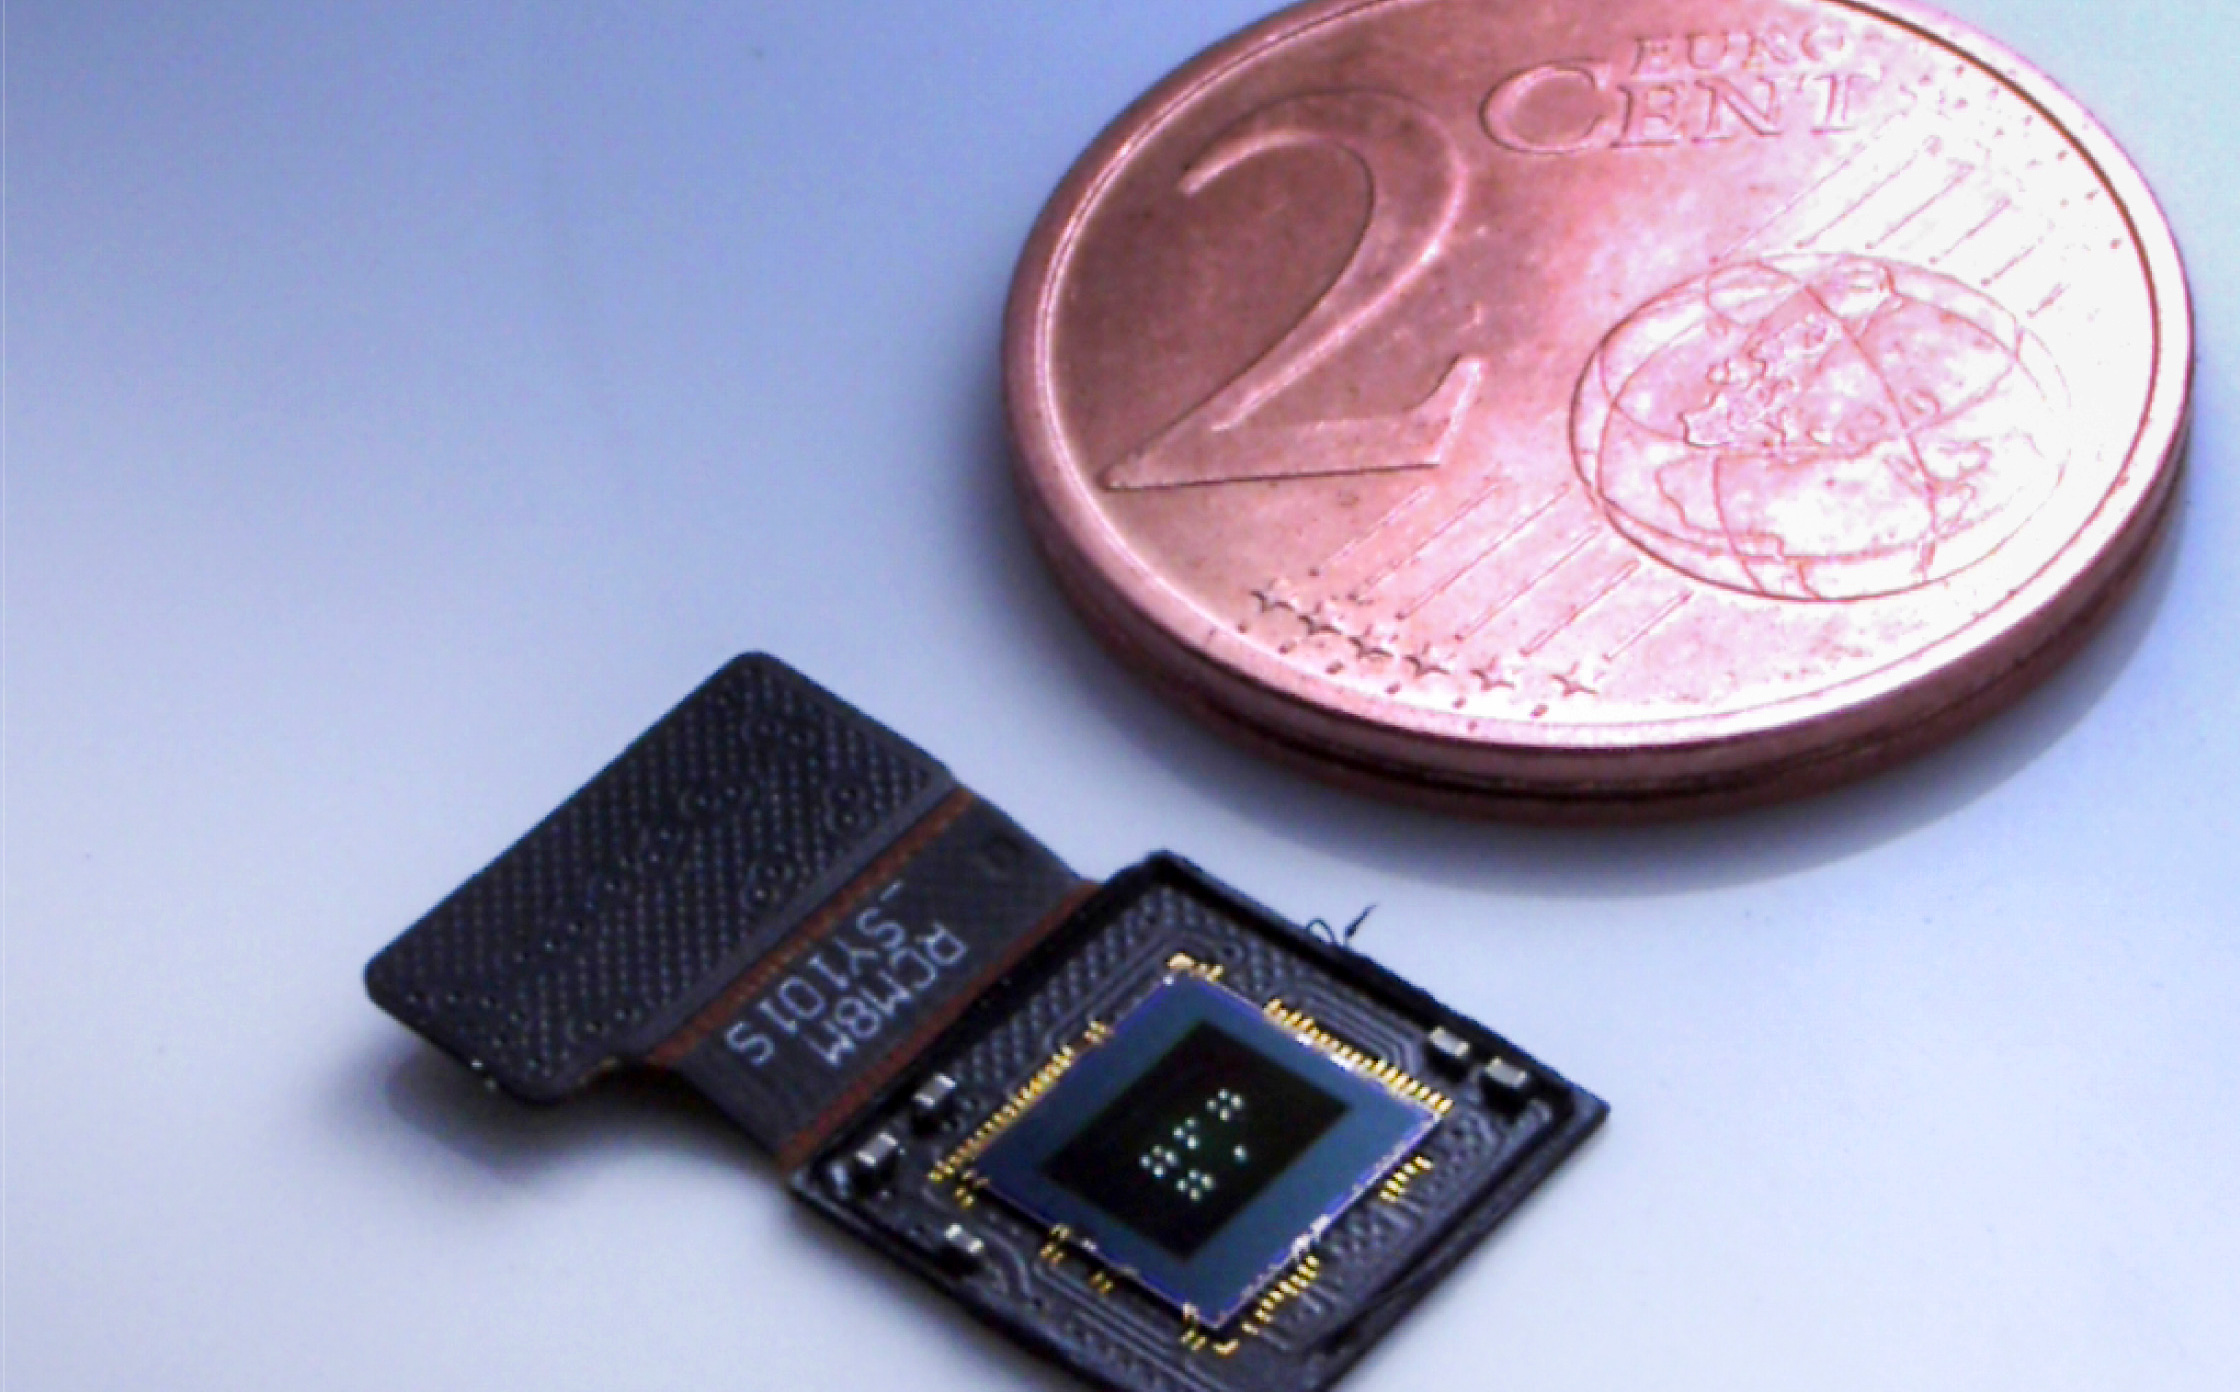 Scientists develop tiny camera the size of a grain of salt